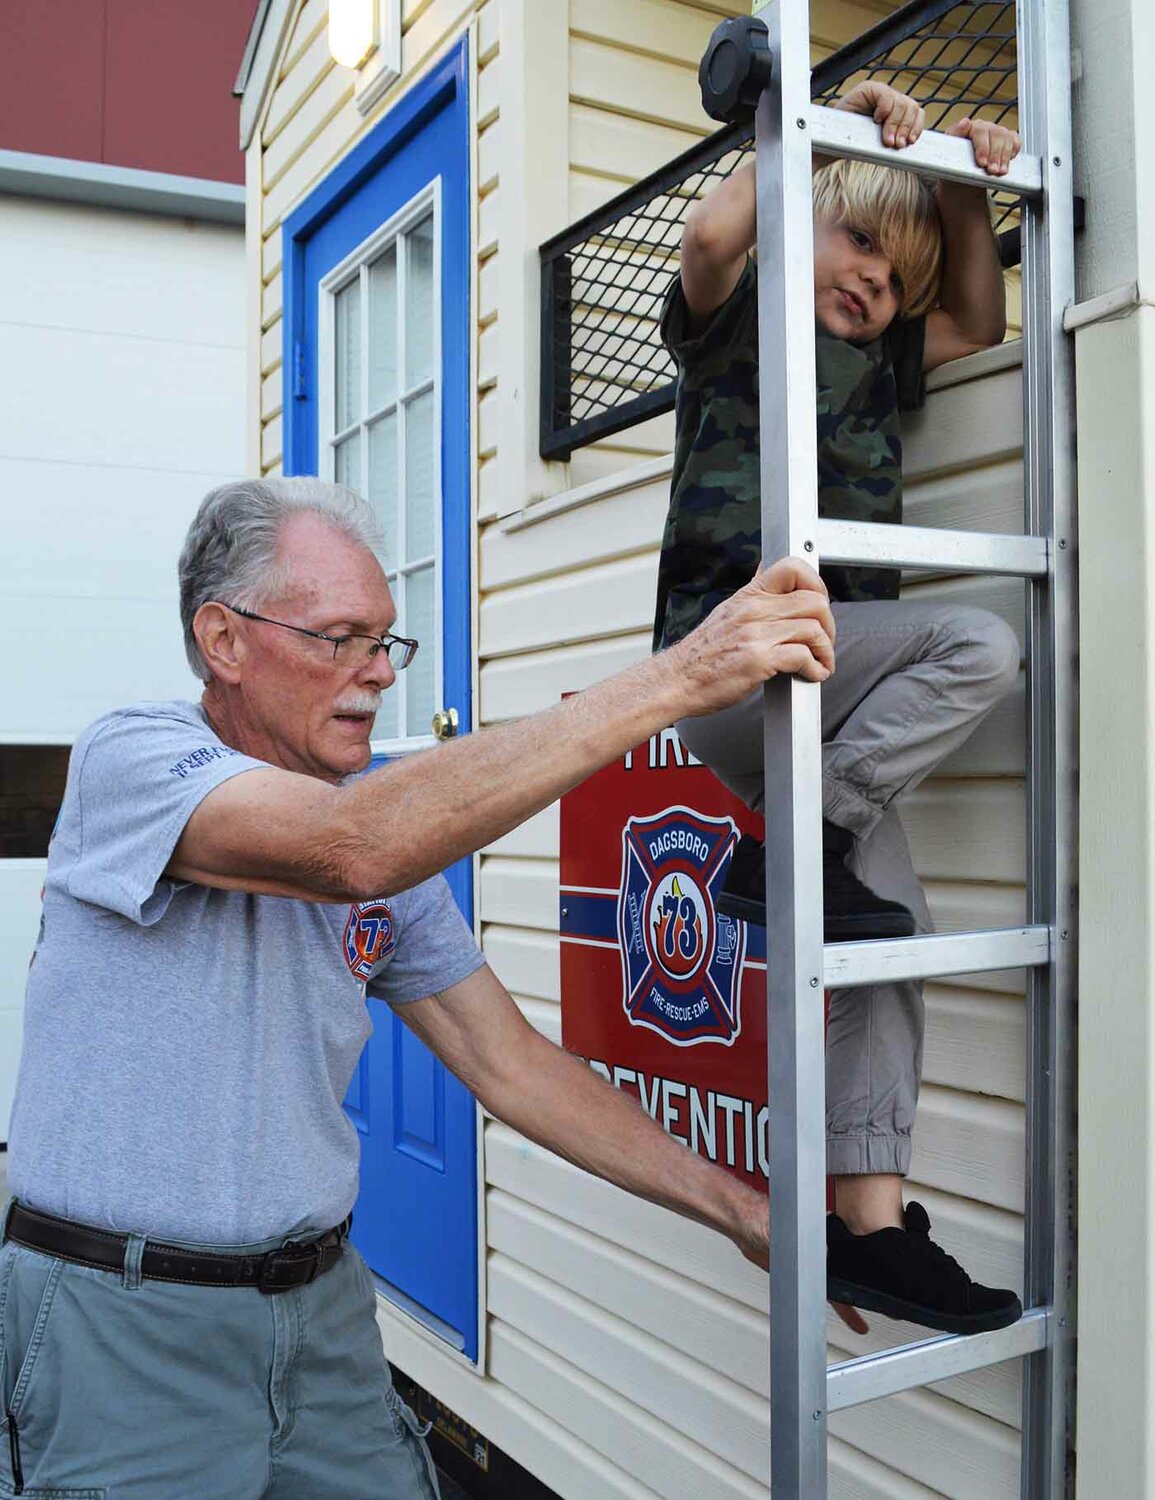 Dagsboro Volunteer Fire Department member Tom Glenn helps Kian McCausland climb down the ladder from the department's safety trailer at the 2022 Dagsboro Night Out.